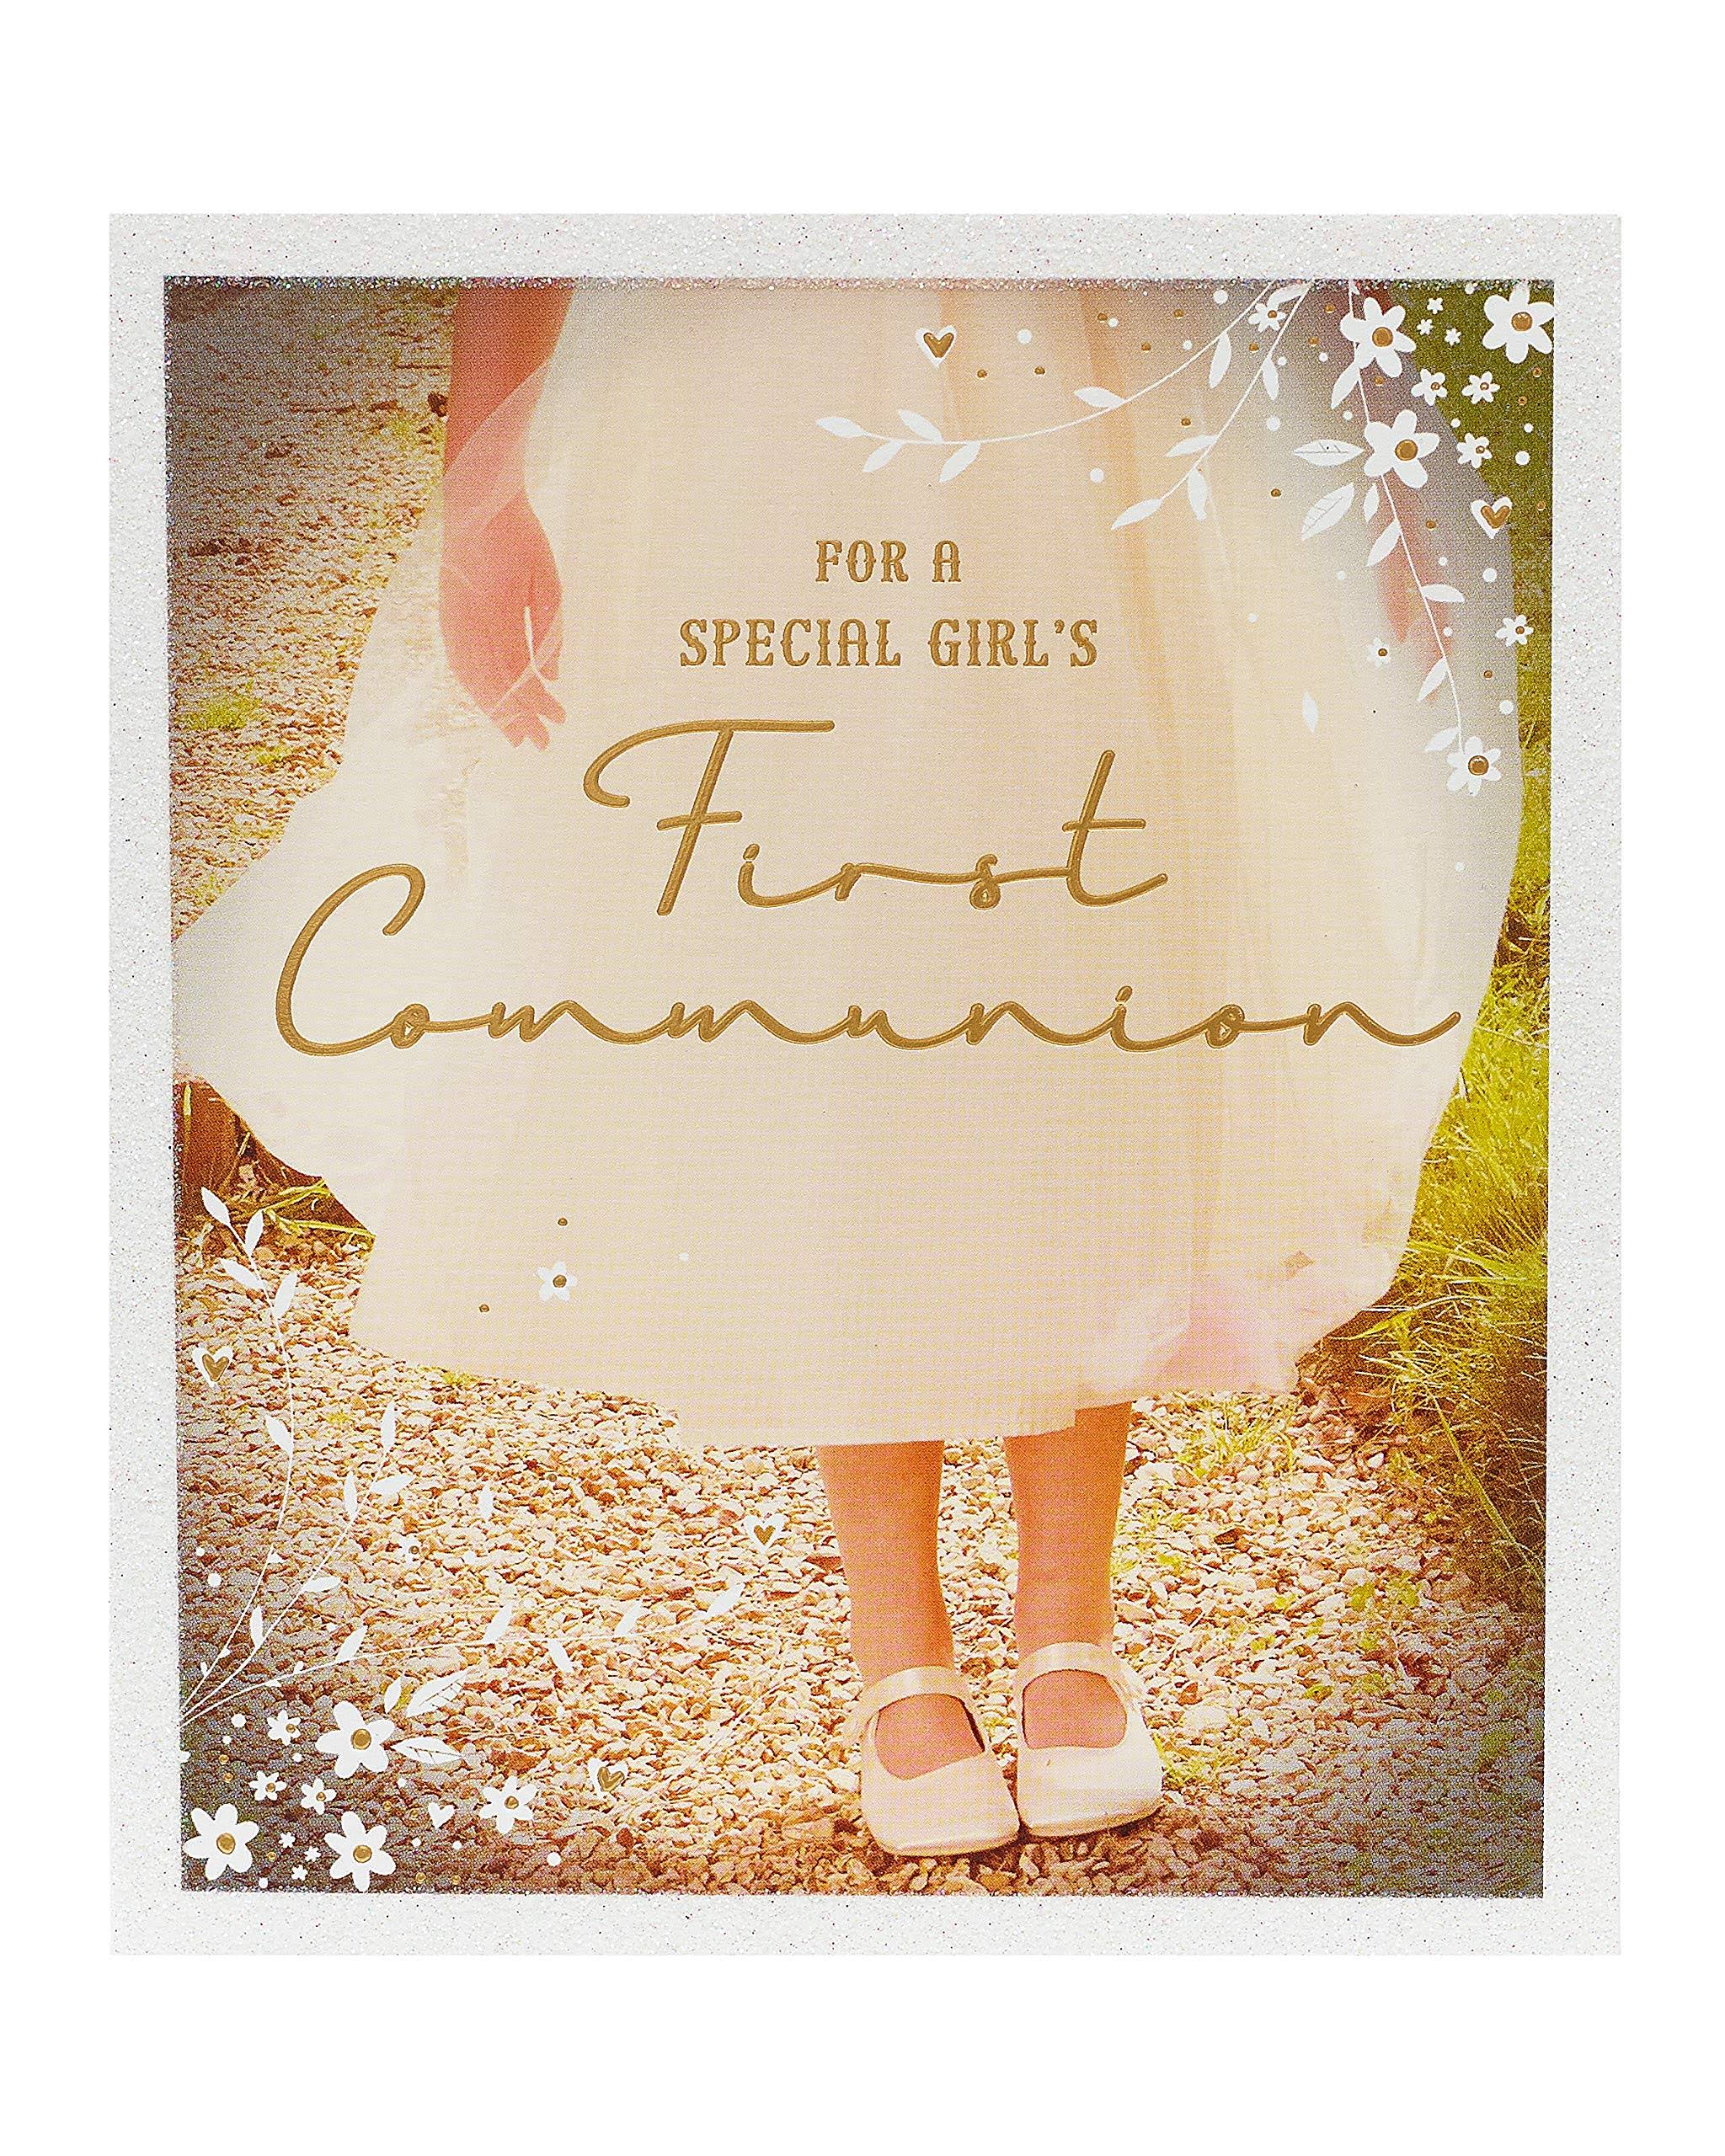 CBC FHC First Holy Communion Wrapping Paper Girls Boys 1st Holy Communion Religious Wrapping Paper Gifts Girls Boys